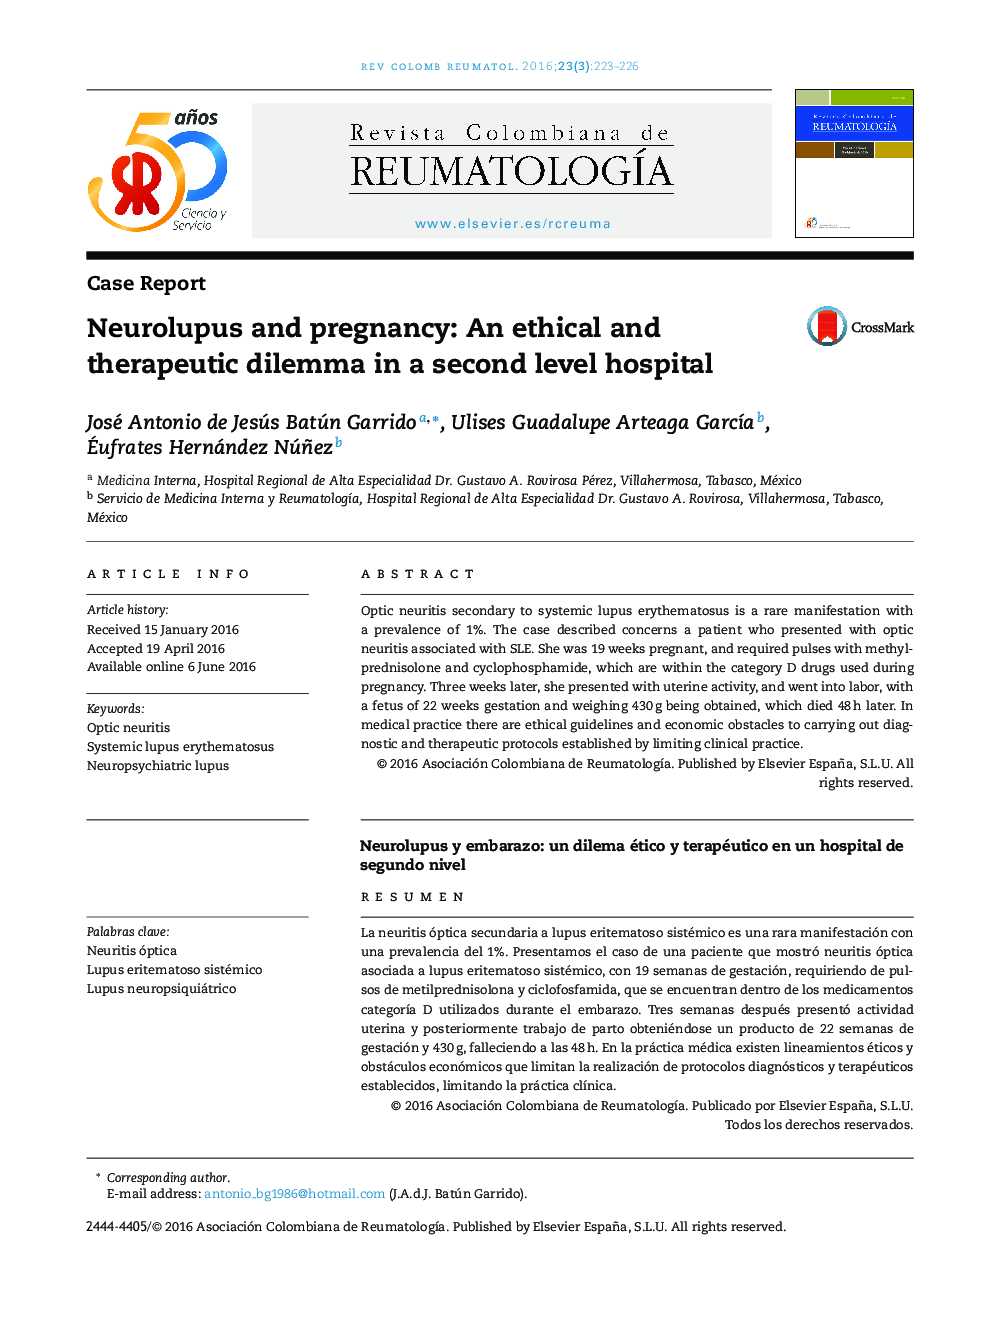 Neurolupus and pregnancy: An ethical and therapeutic dilemma in a second level hospital